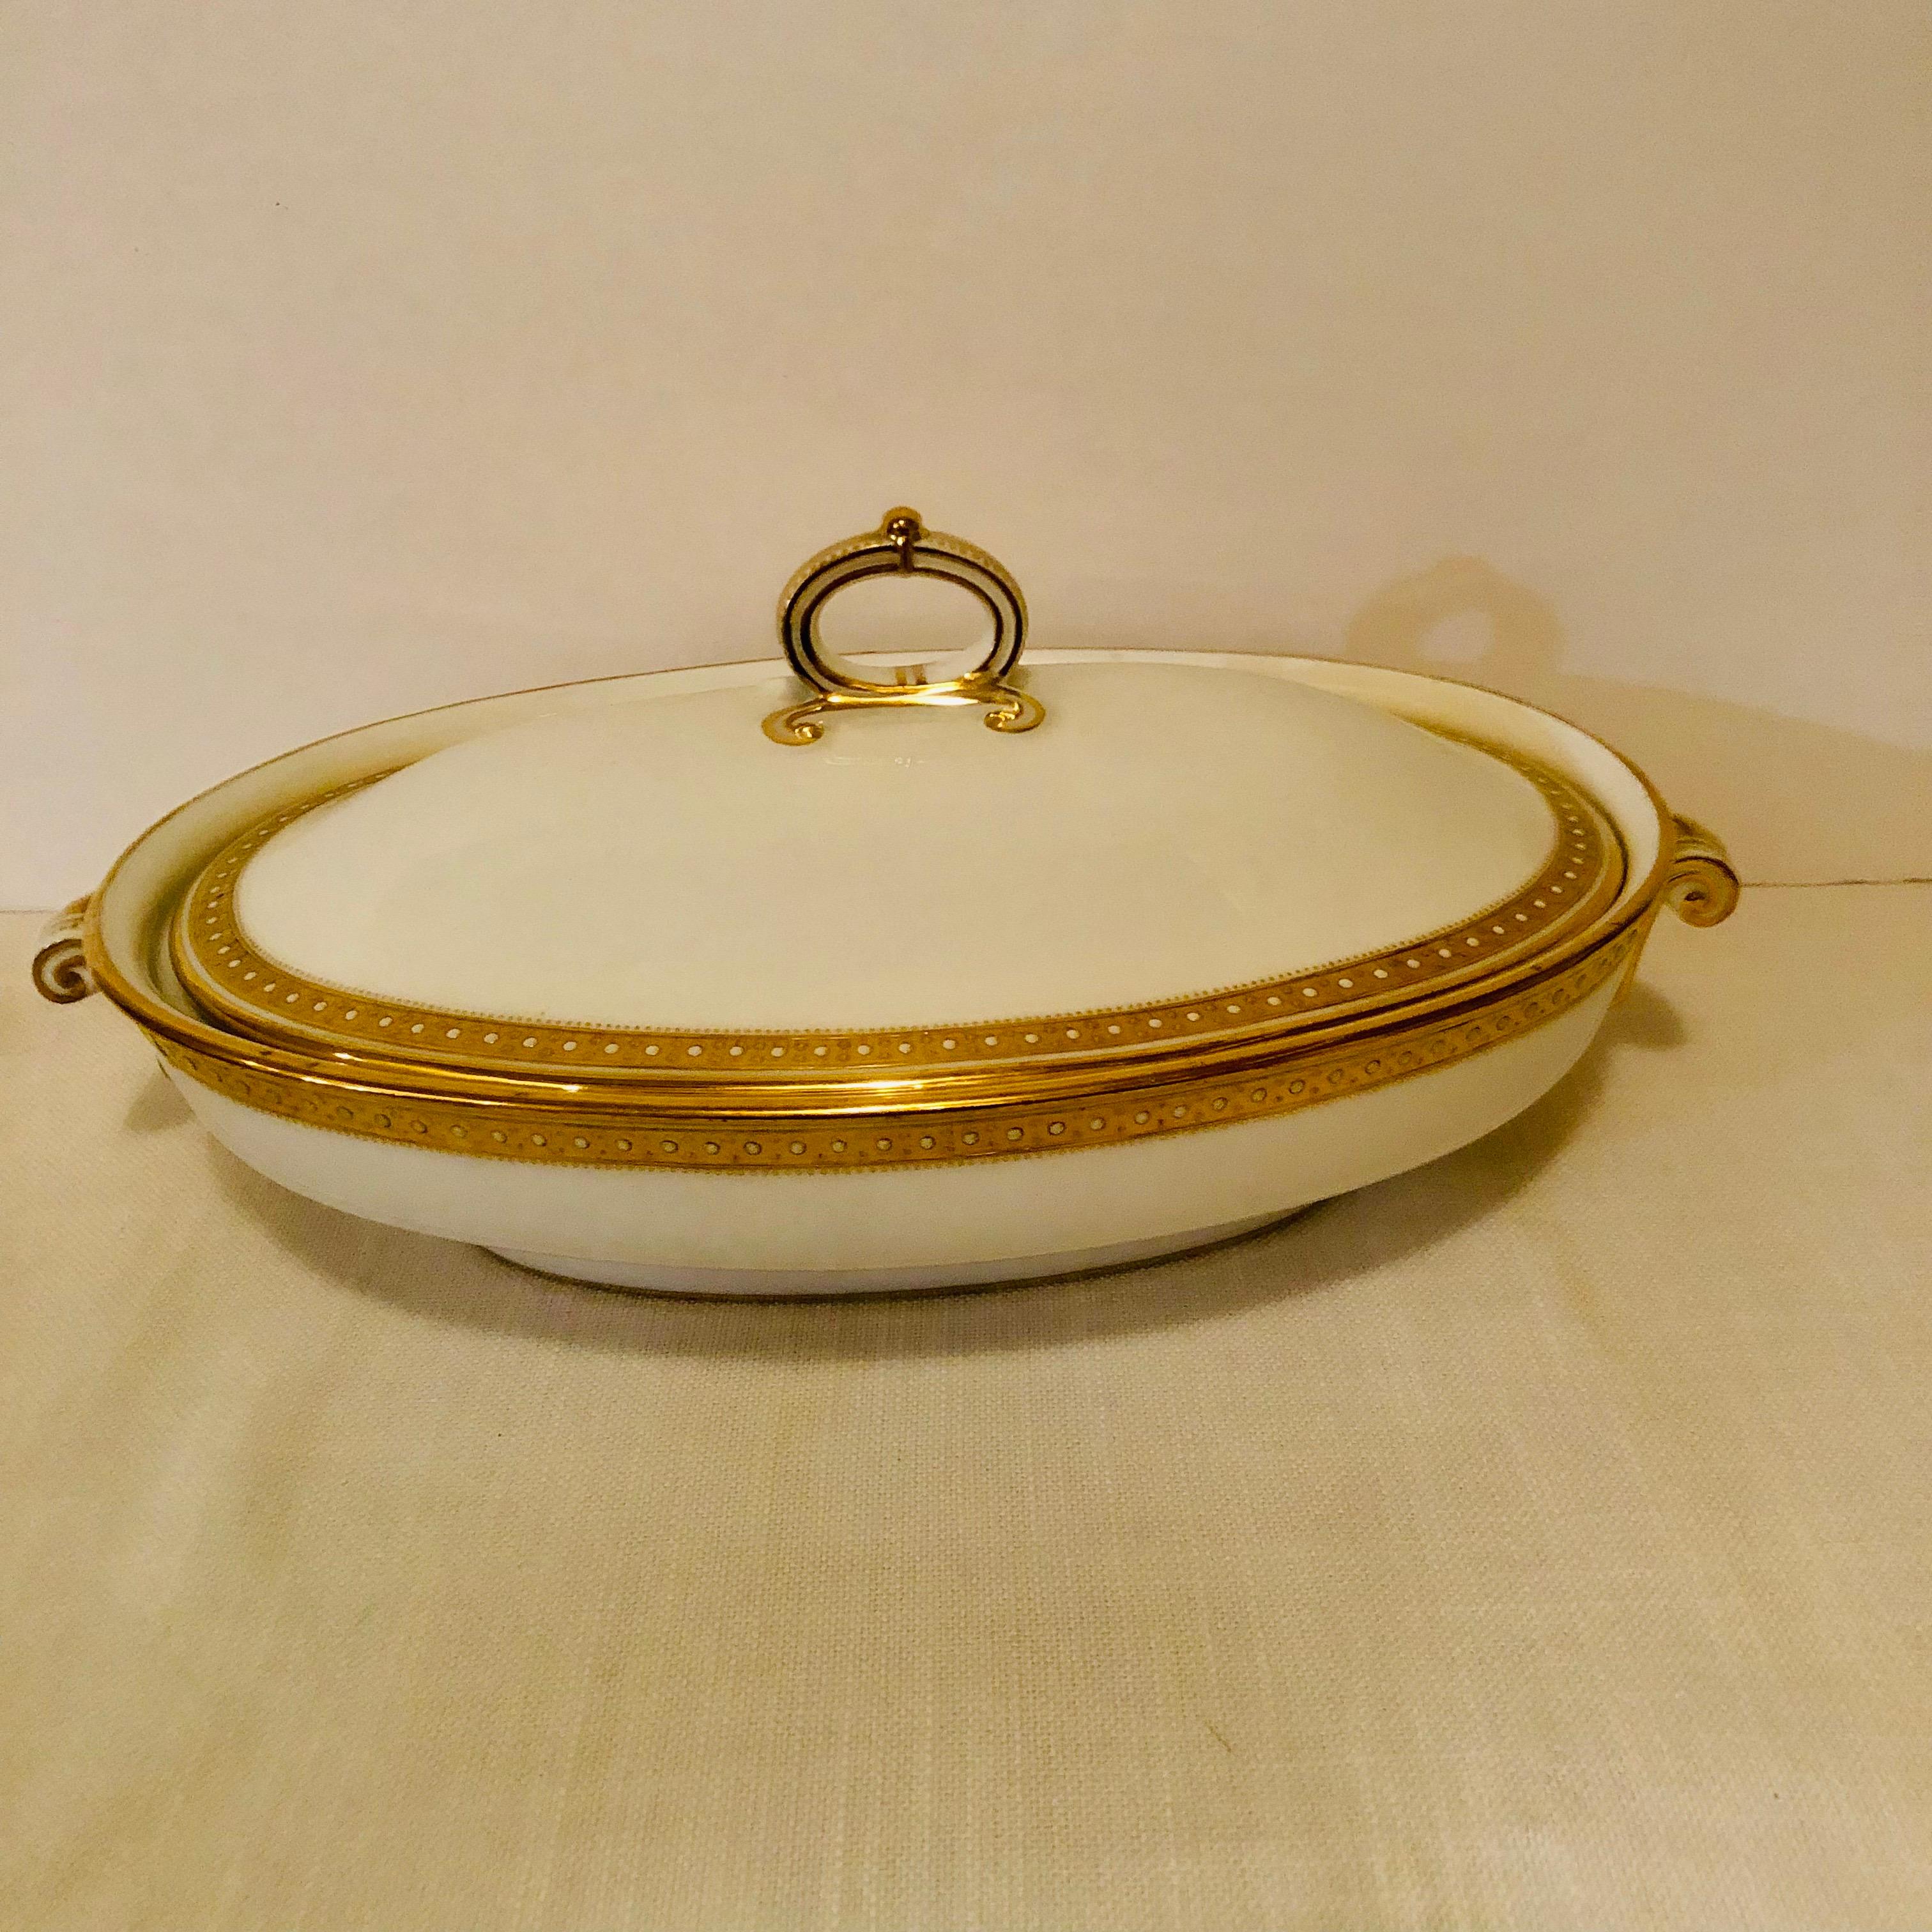 Neoclassical Copeland Spode Covered Vegetable with Gold Border and Jeweling Made for T. Goode